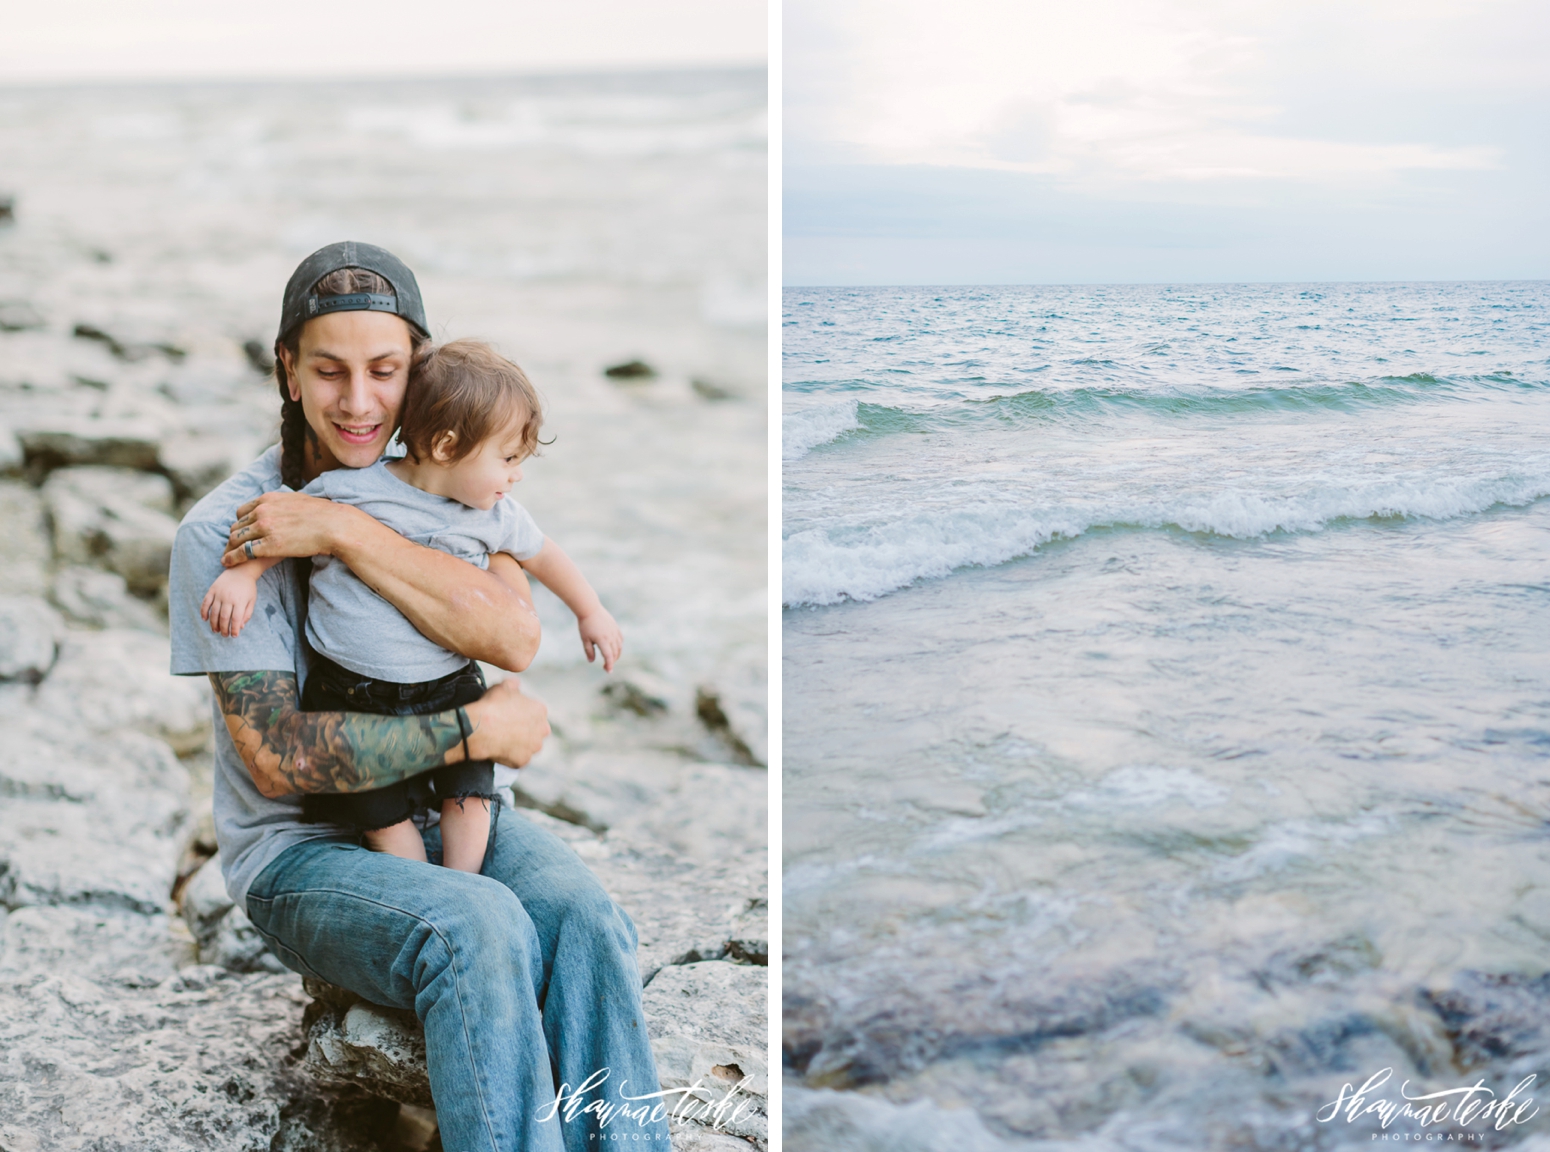 shaunae_teske_wisconsin_photographer_family-cave-point-door-county-wolfgang-symphony-49